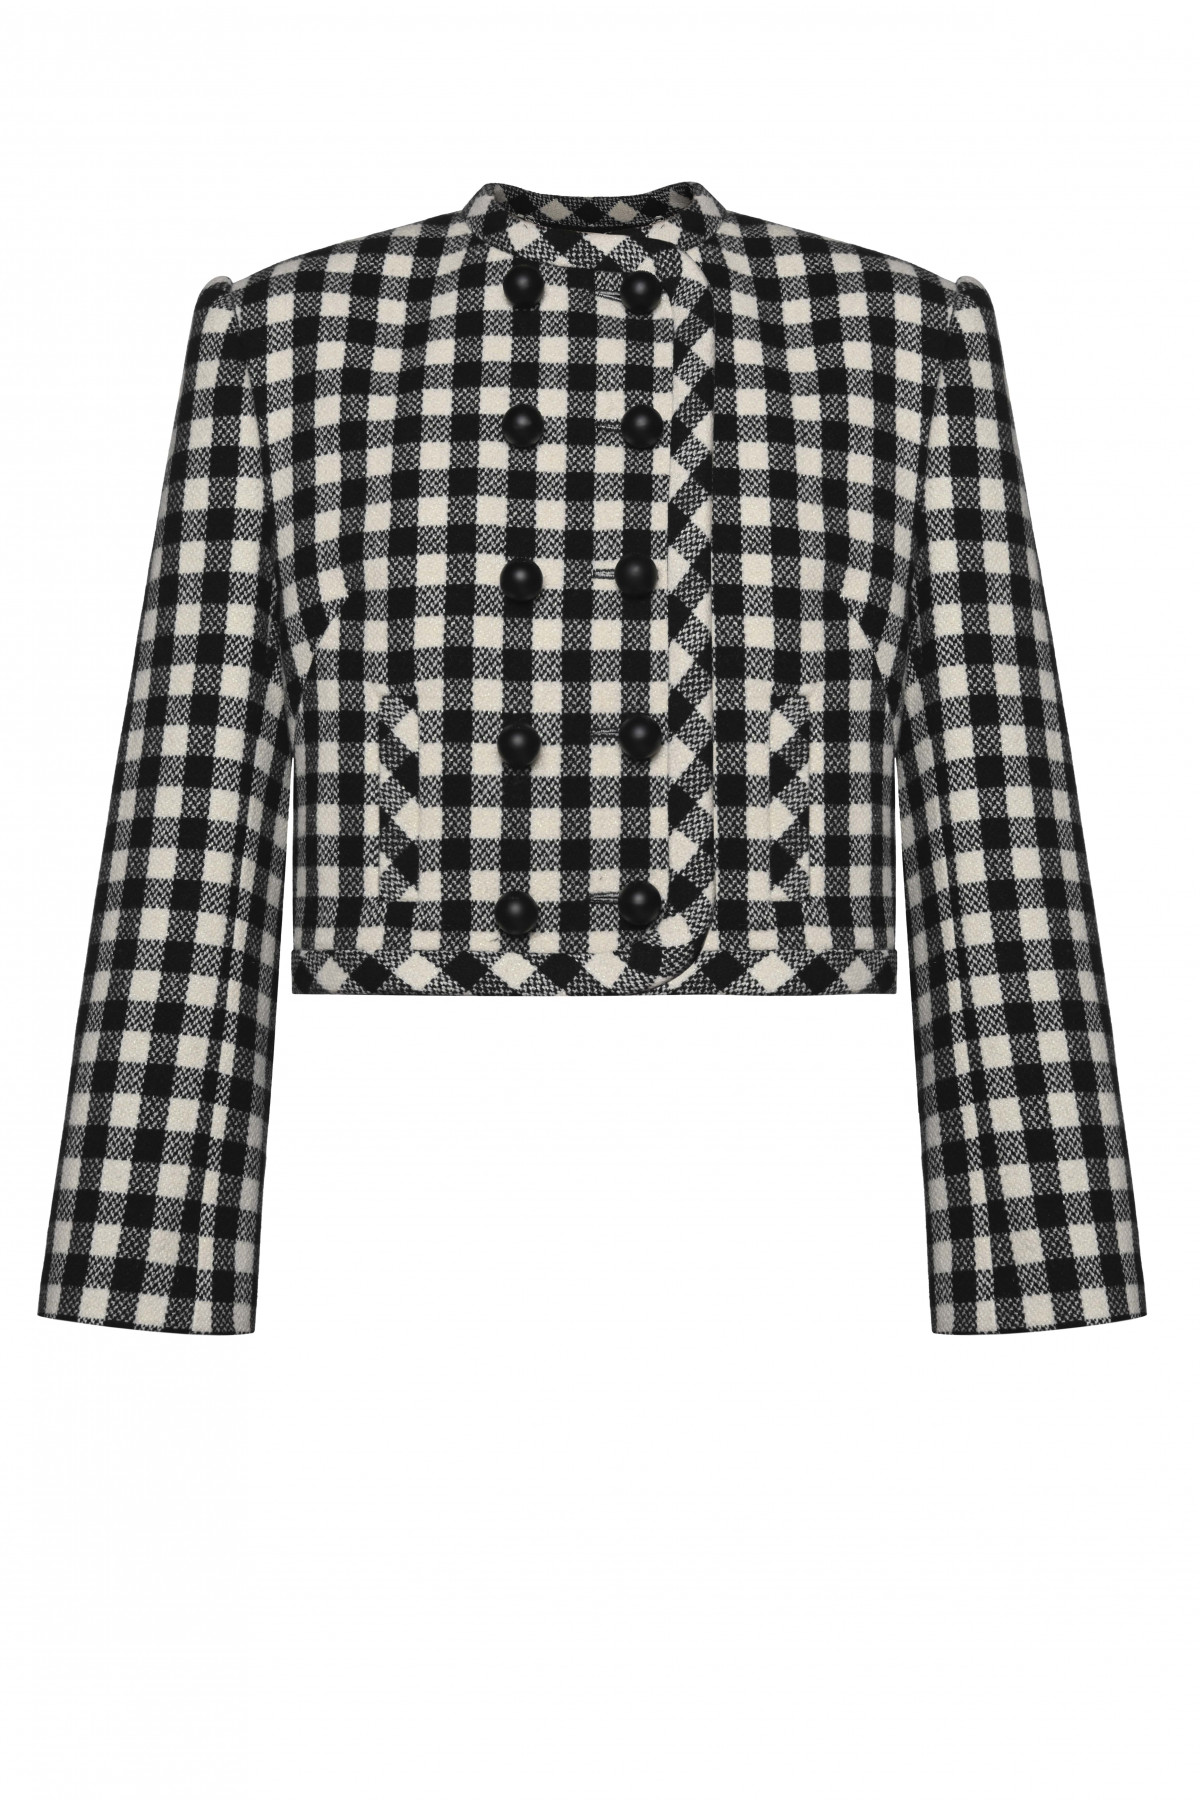 GEORGE KEBURIA - CHECKED DOUBLE-BREASTED JACKET